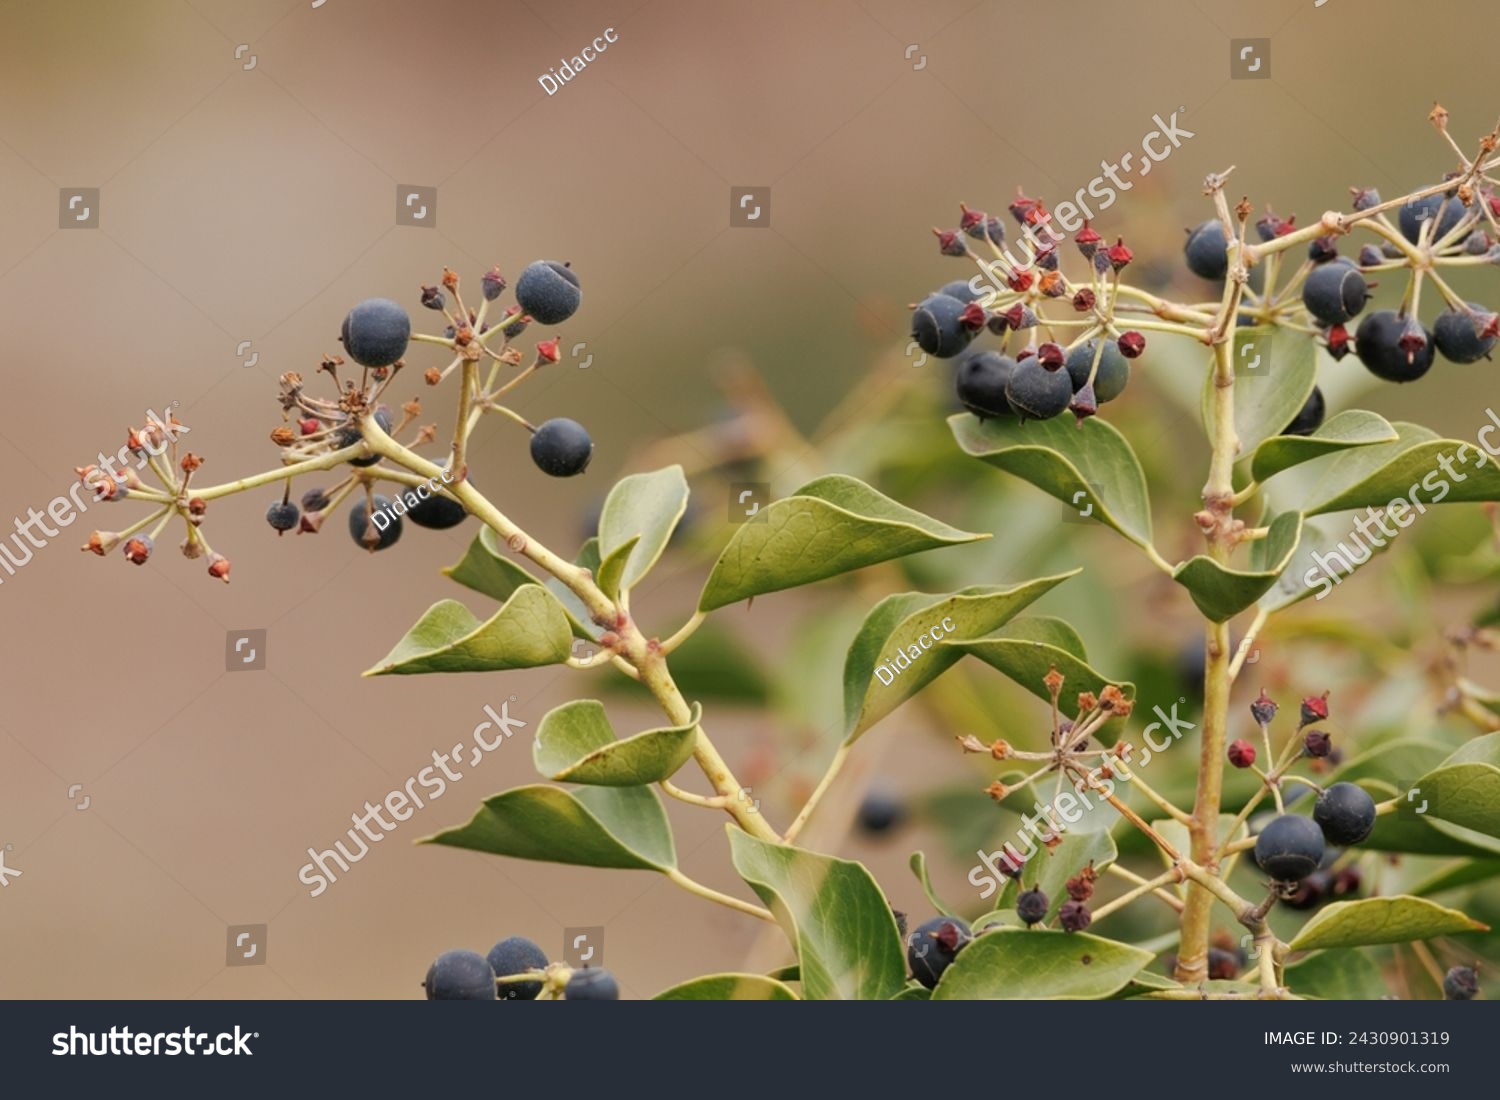 Poison ivy with berries, Hedera canariensis, Alcoy, Spain #2430901319